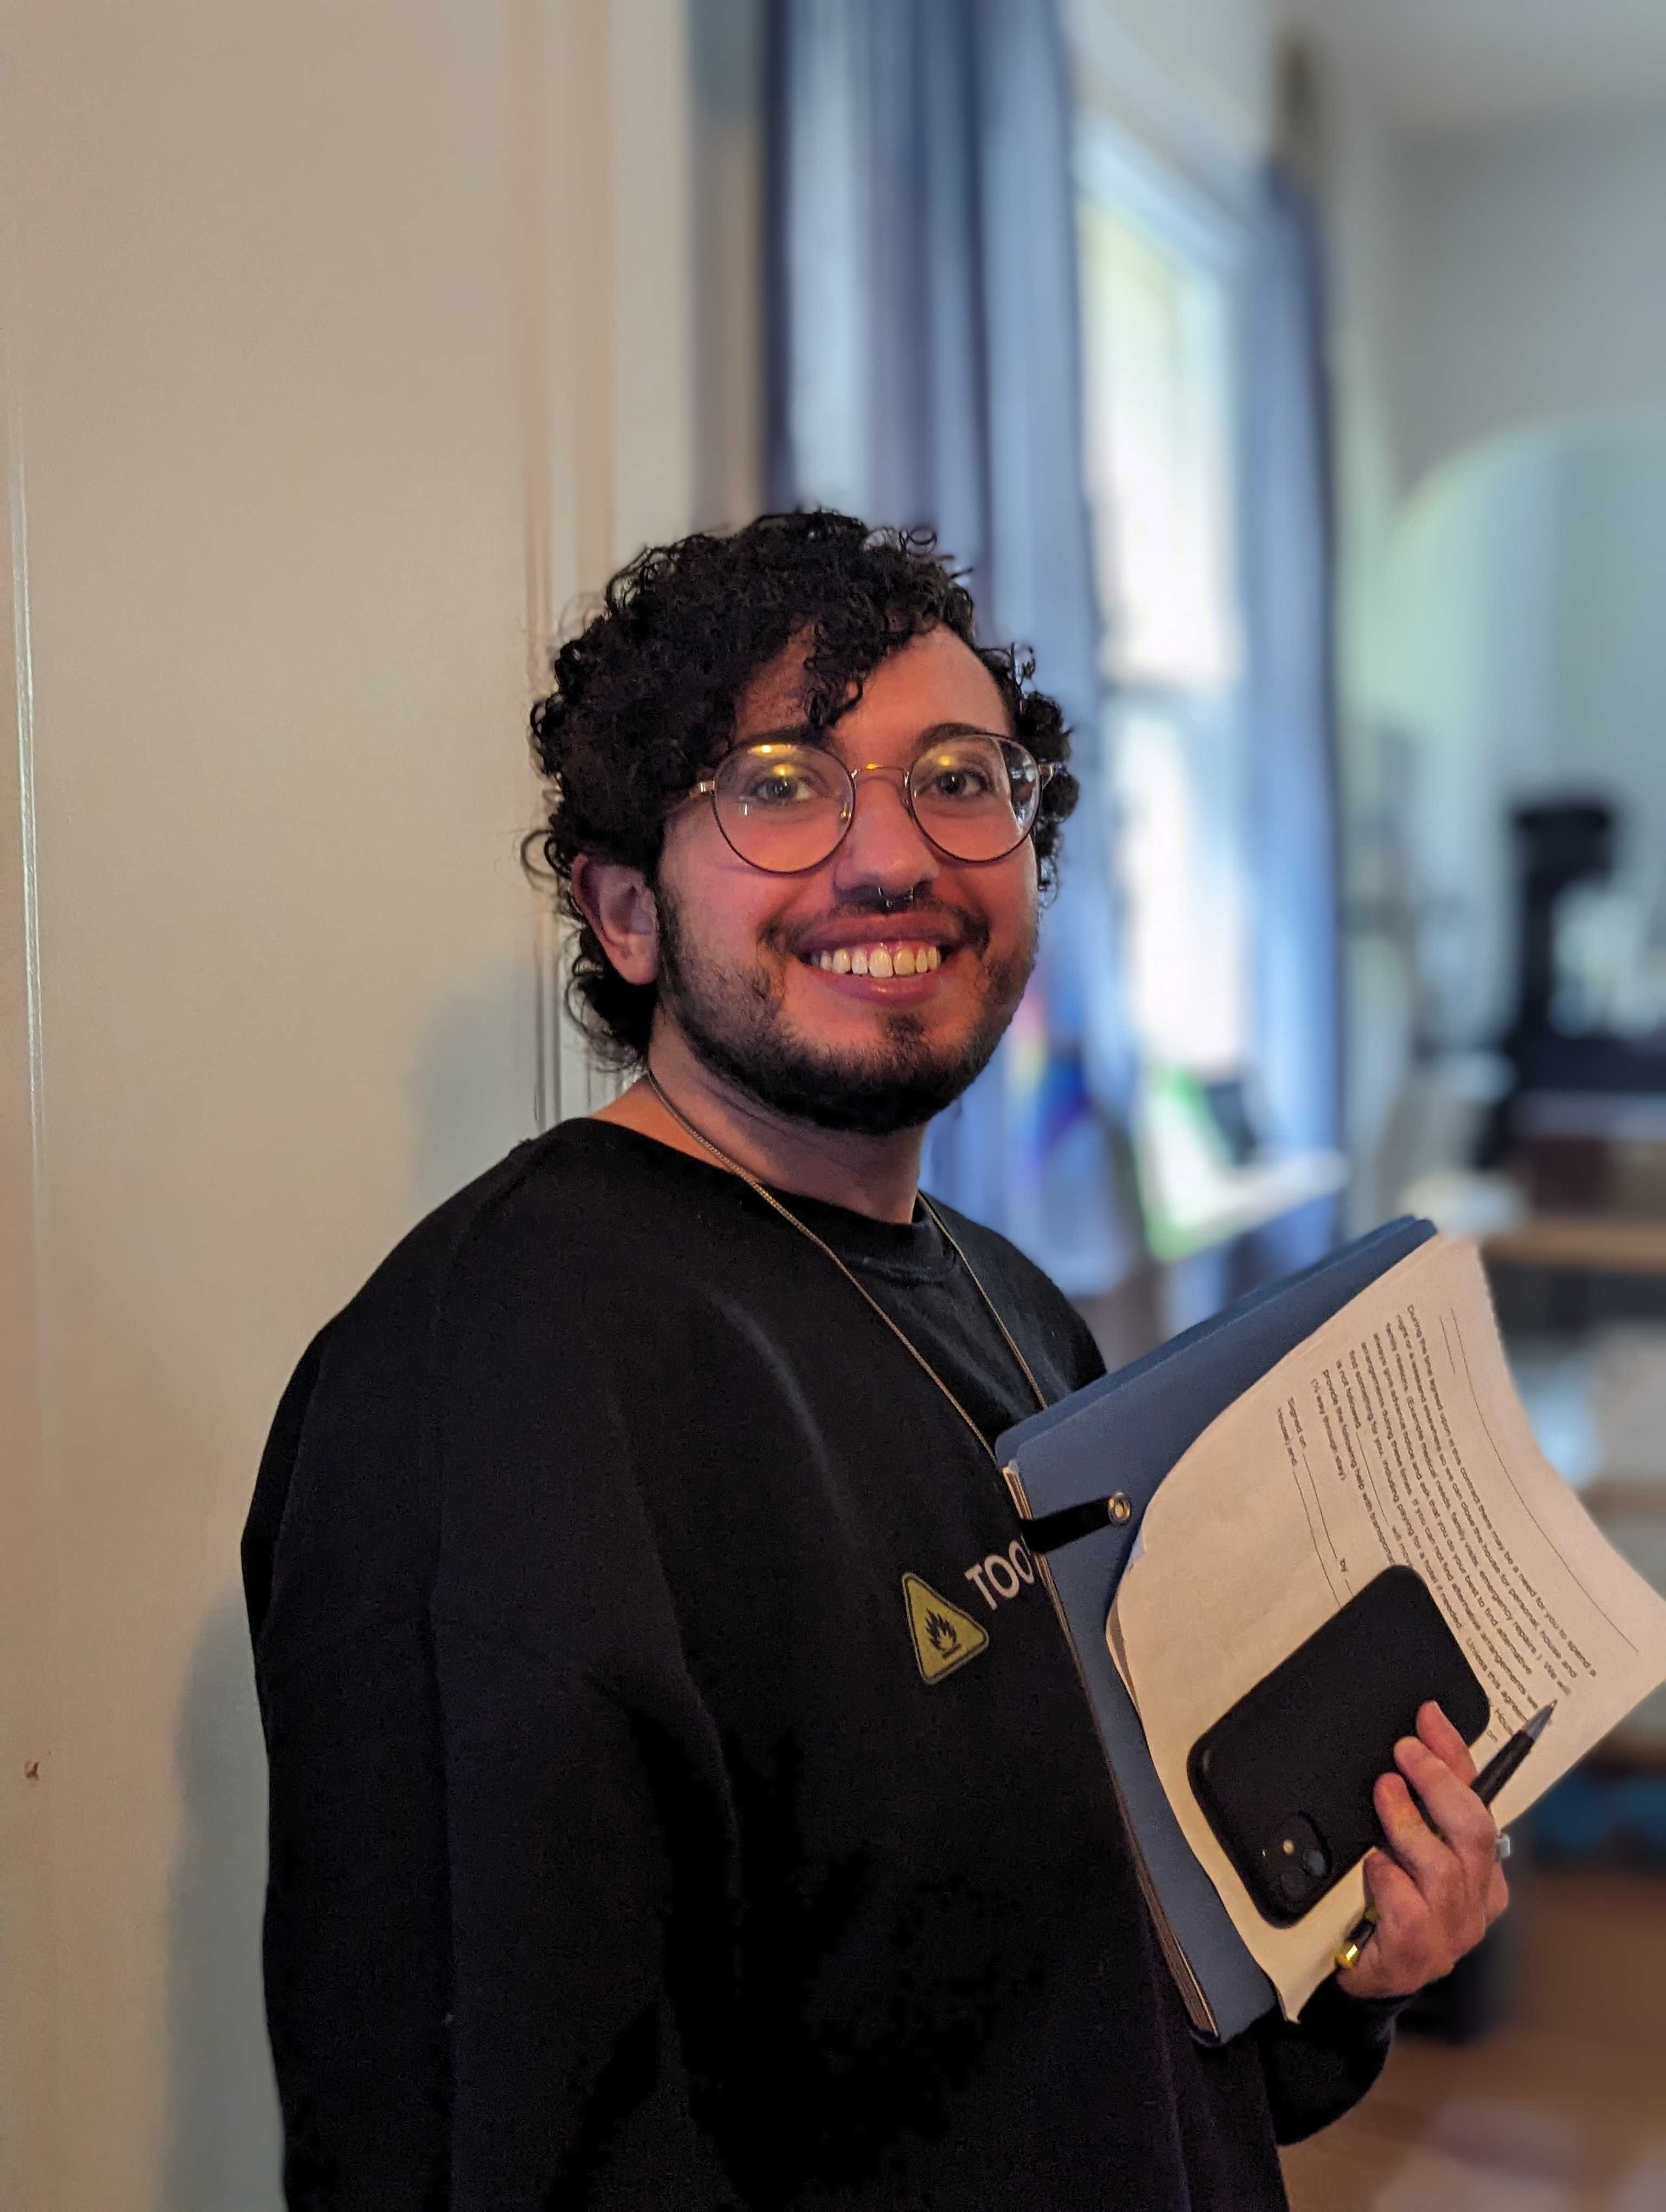 A photo of Grey, a member of Detroit Peer Respite, looking at the camera and smiling awkwardly. He holds a notebook in one hand.